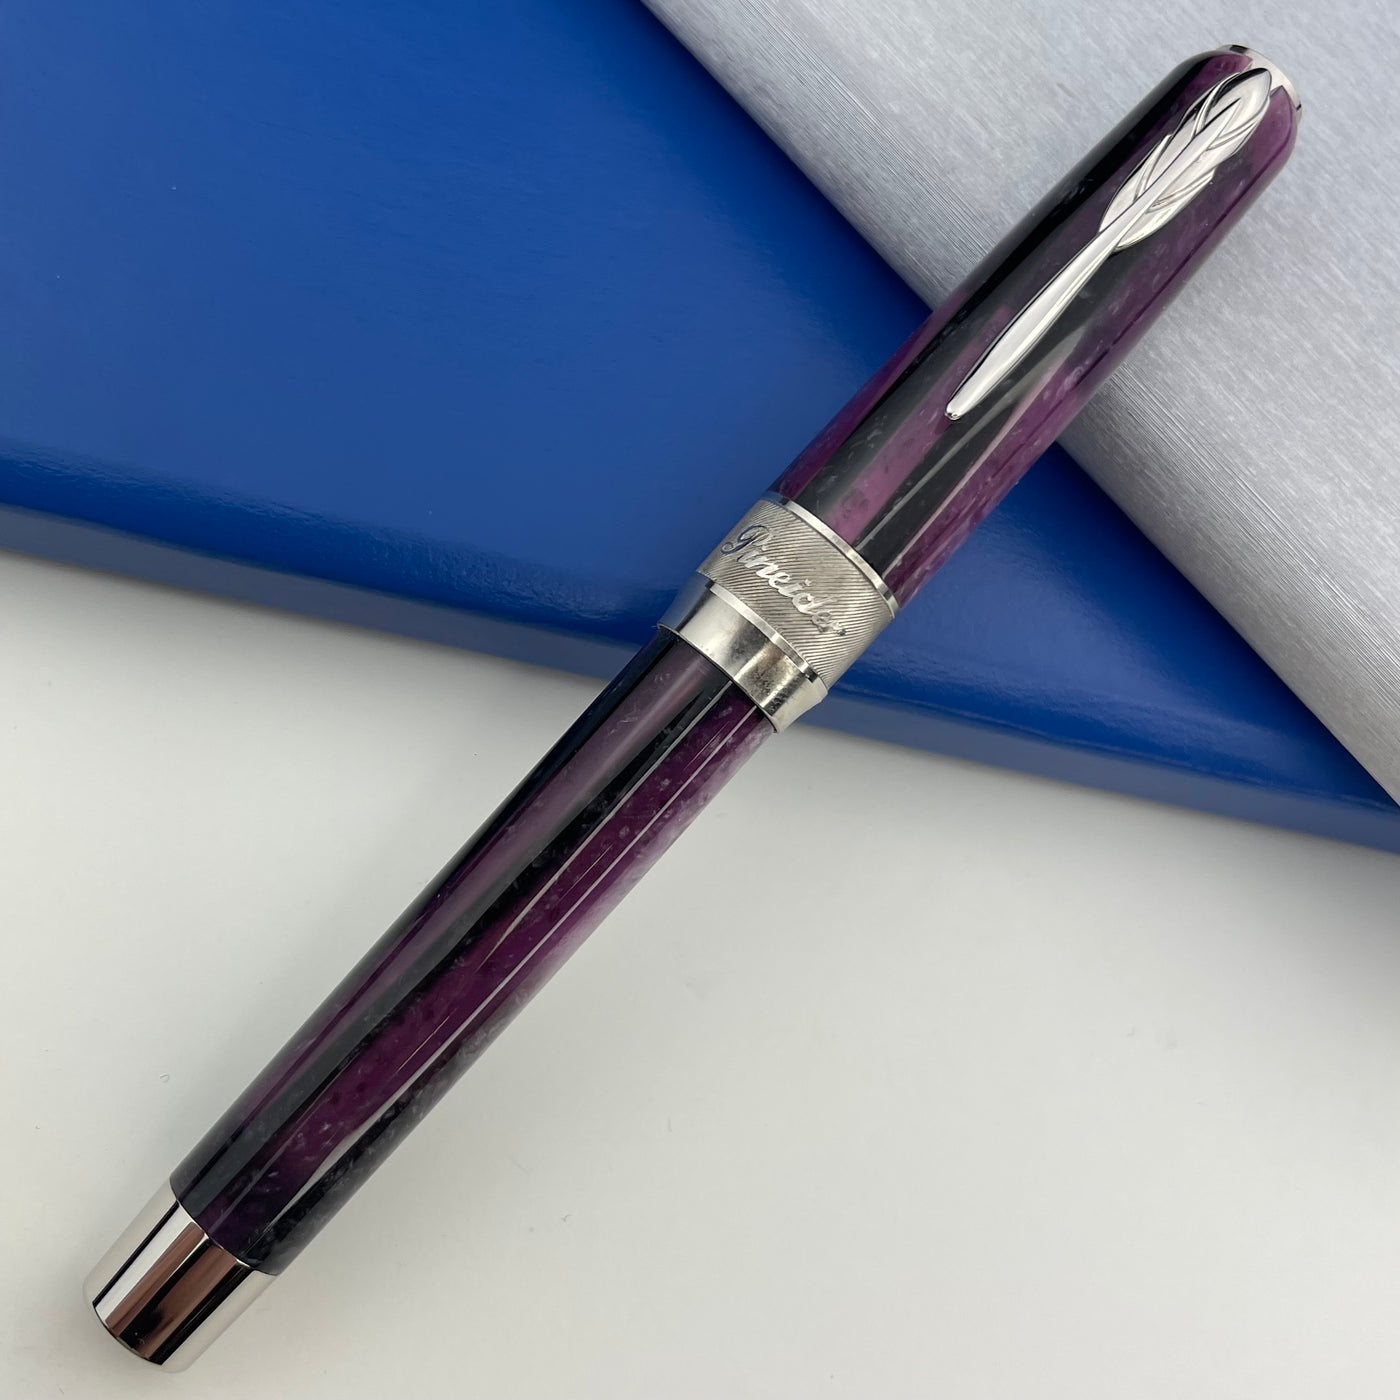 Pineider Arco Fountain Pen - Violet (Limited Edition)